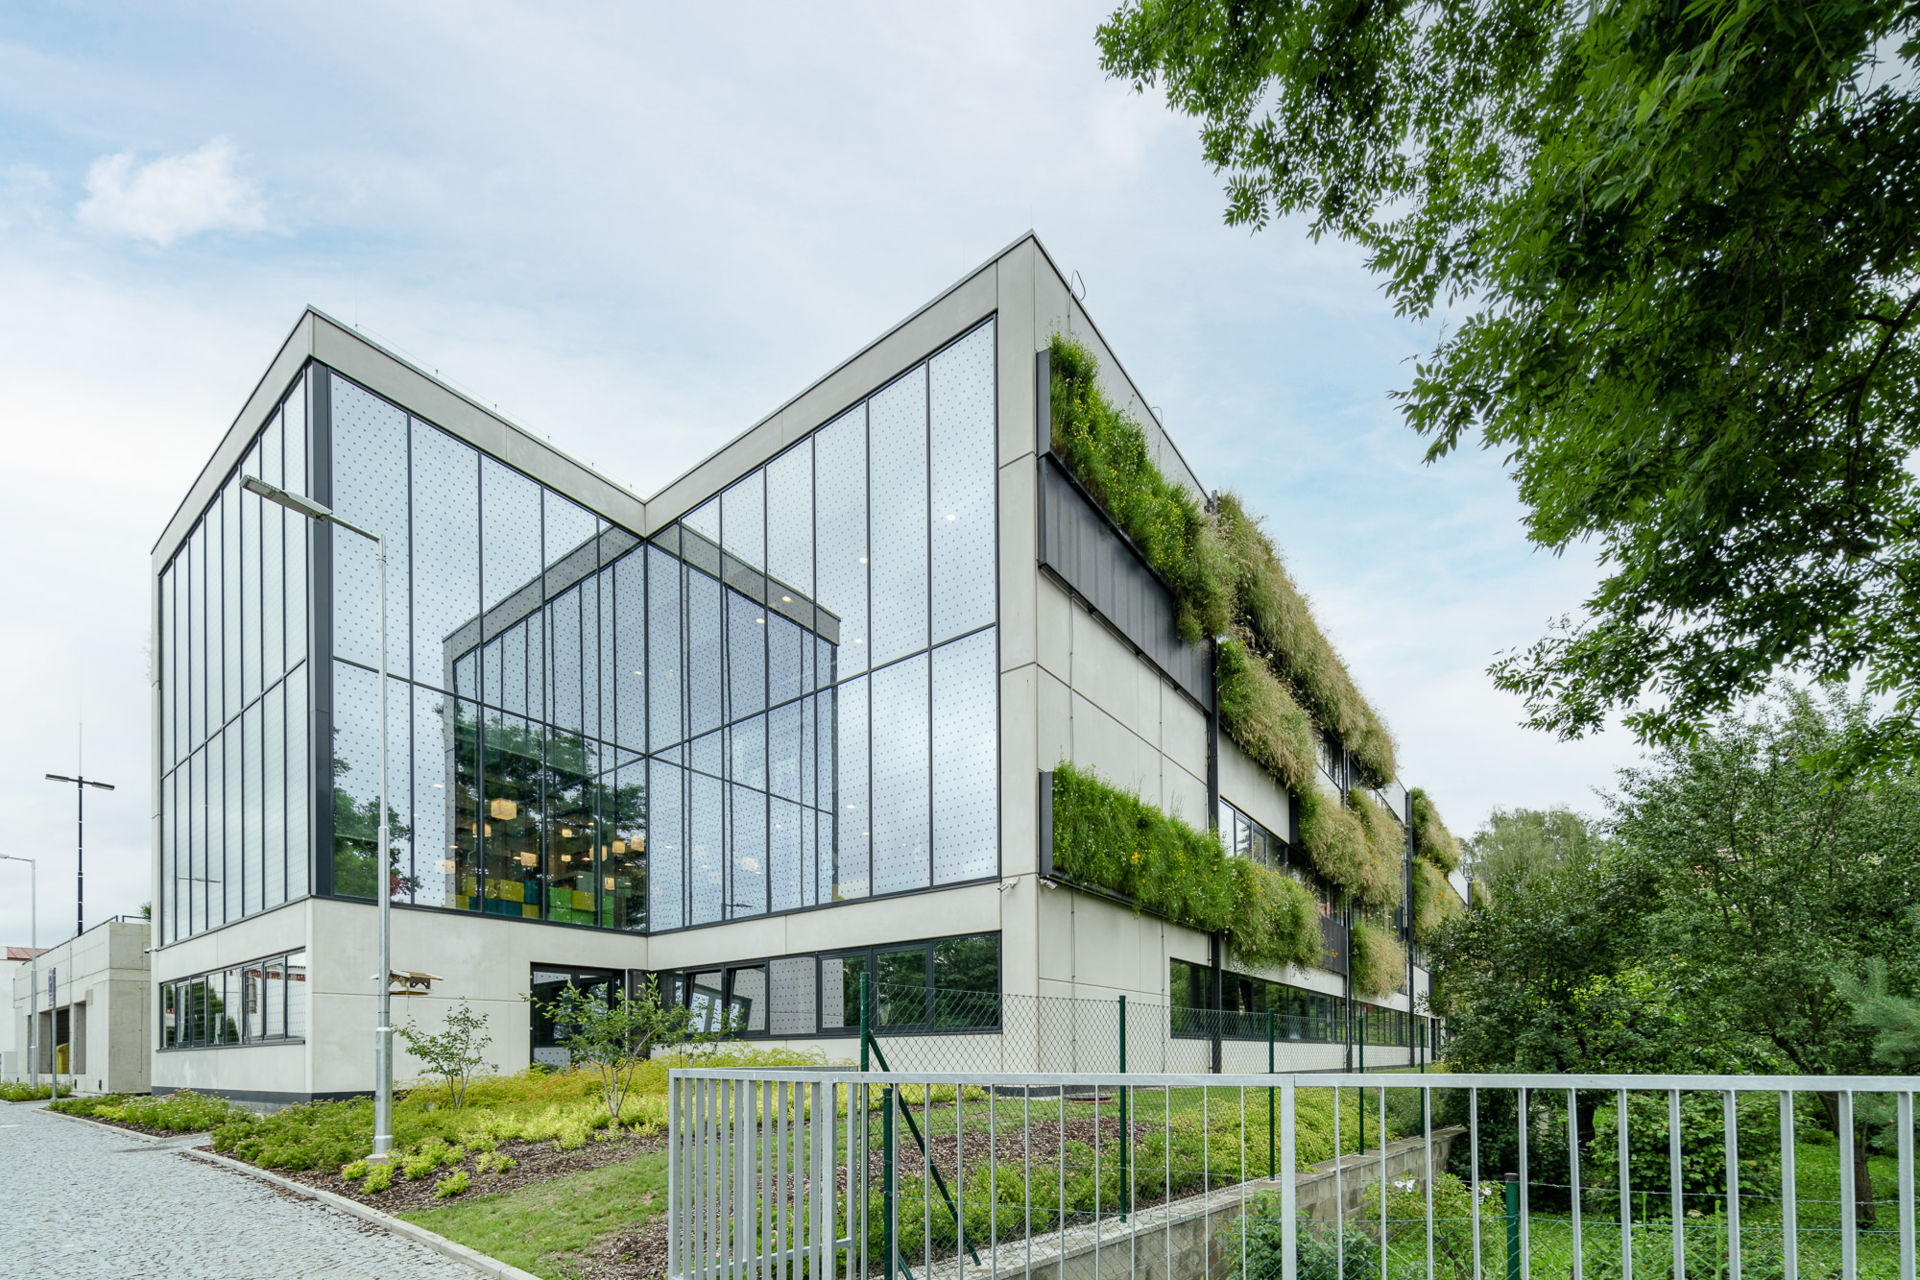  The new building of the Vysočina Regional Library was built in harmony with the surrounding environment